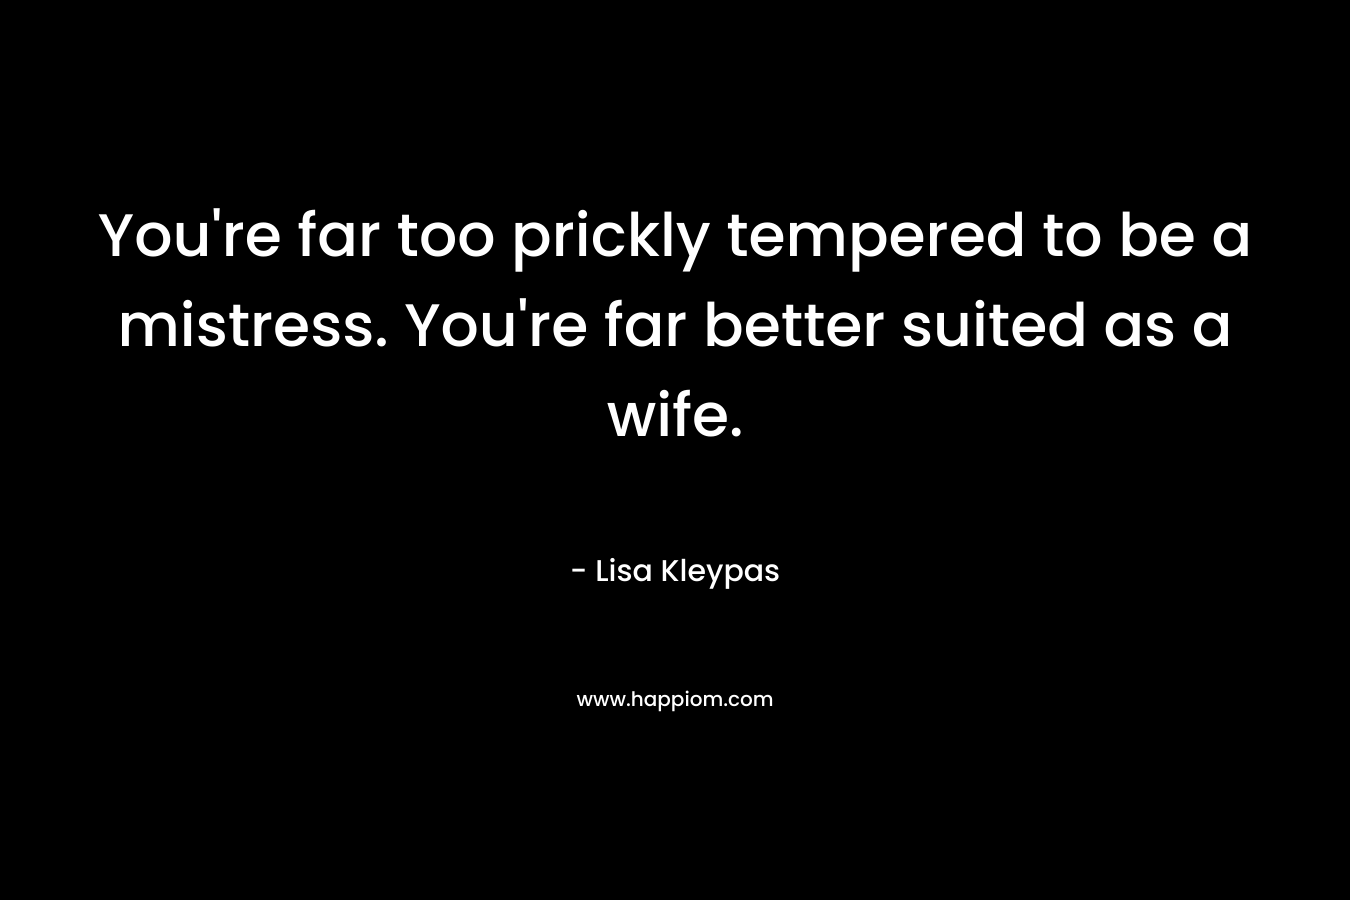 You’re far too prickly tempered to be a mistress. You’re far better suited as a wife. – Lisa Kleypas